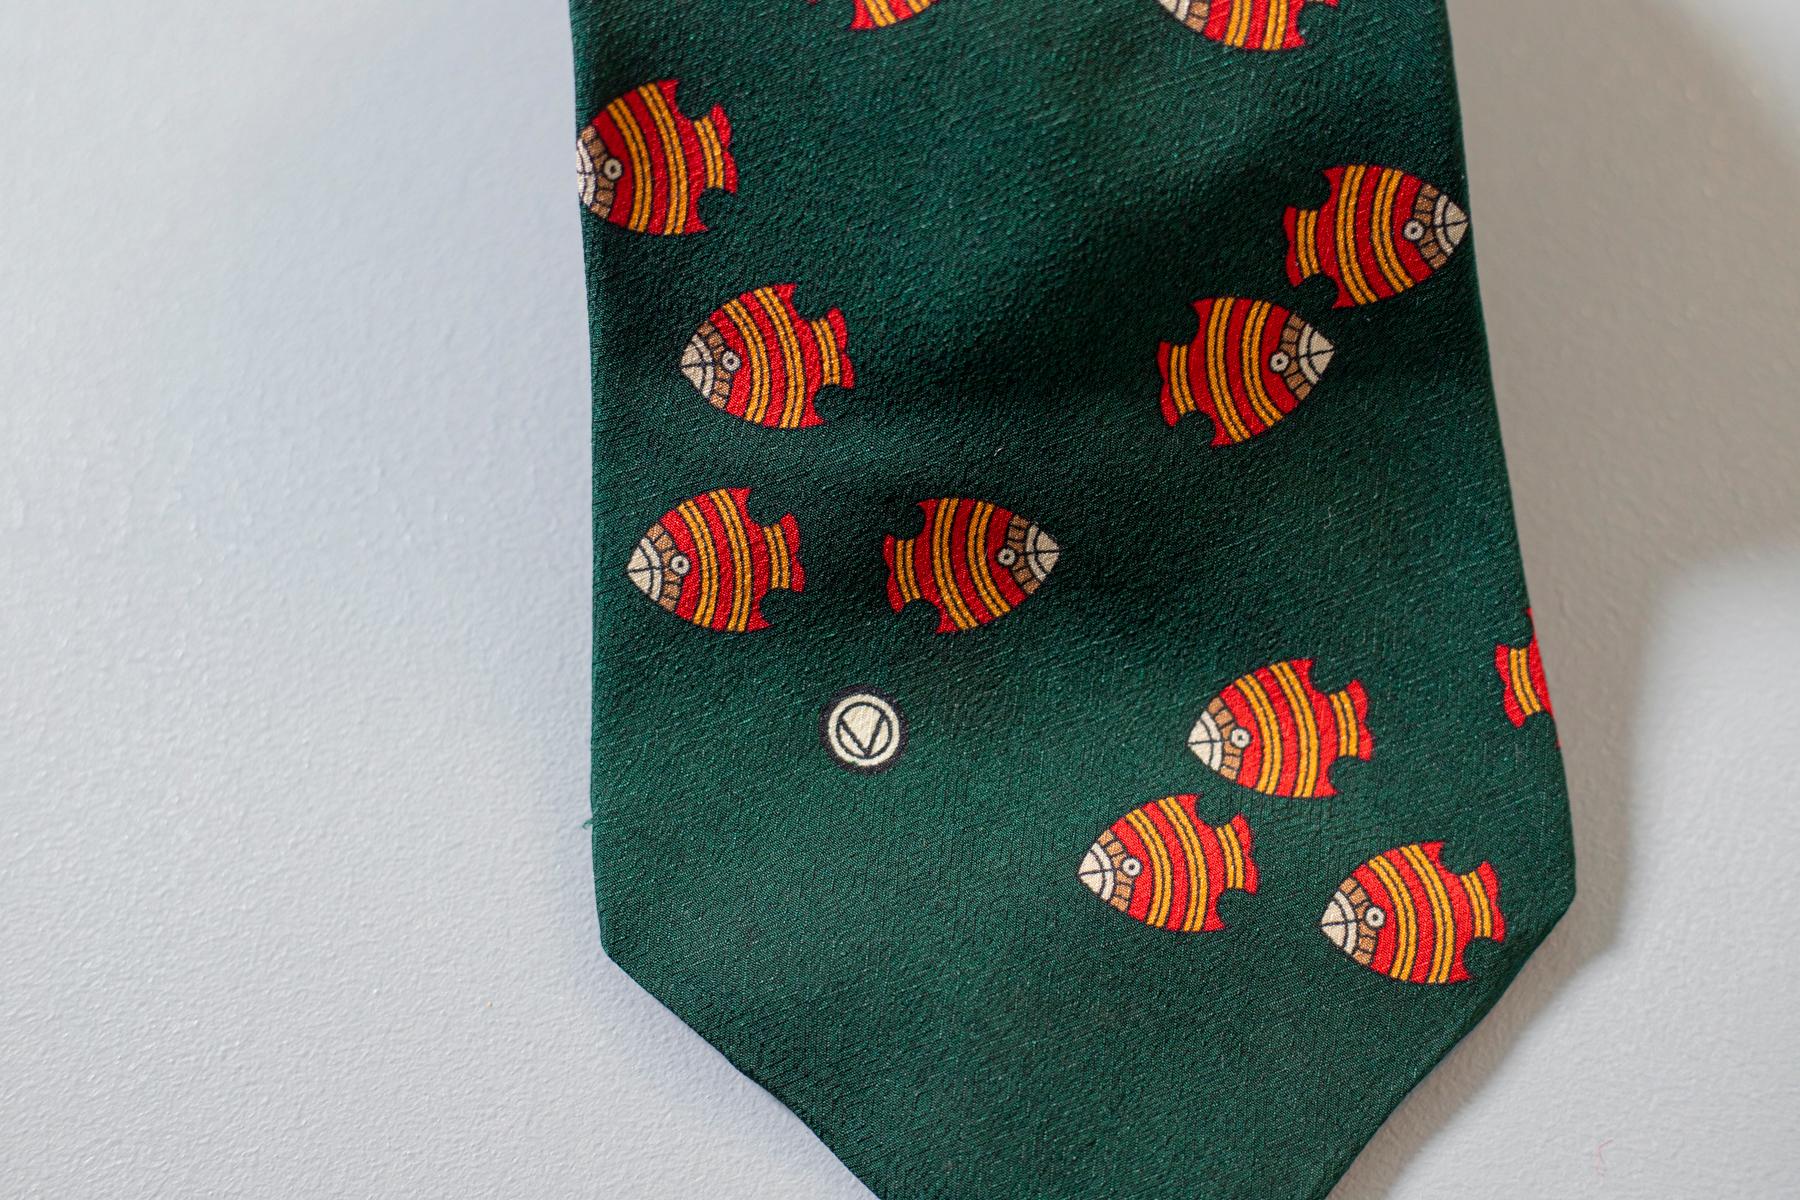 Designed by Valentino, this tie mirrors the Italian most light-hearted side. Made in all silk, this tie displays a group of orange fish swimming on a dark green background. Playful and fun, this tie is perfect for a party with your friends.